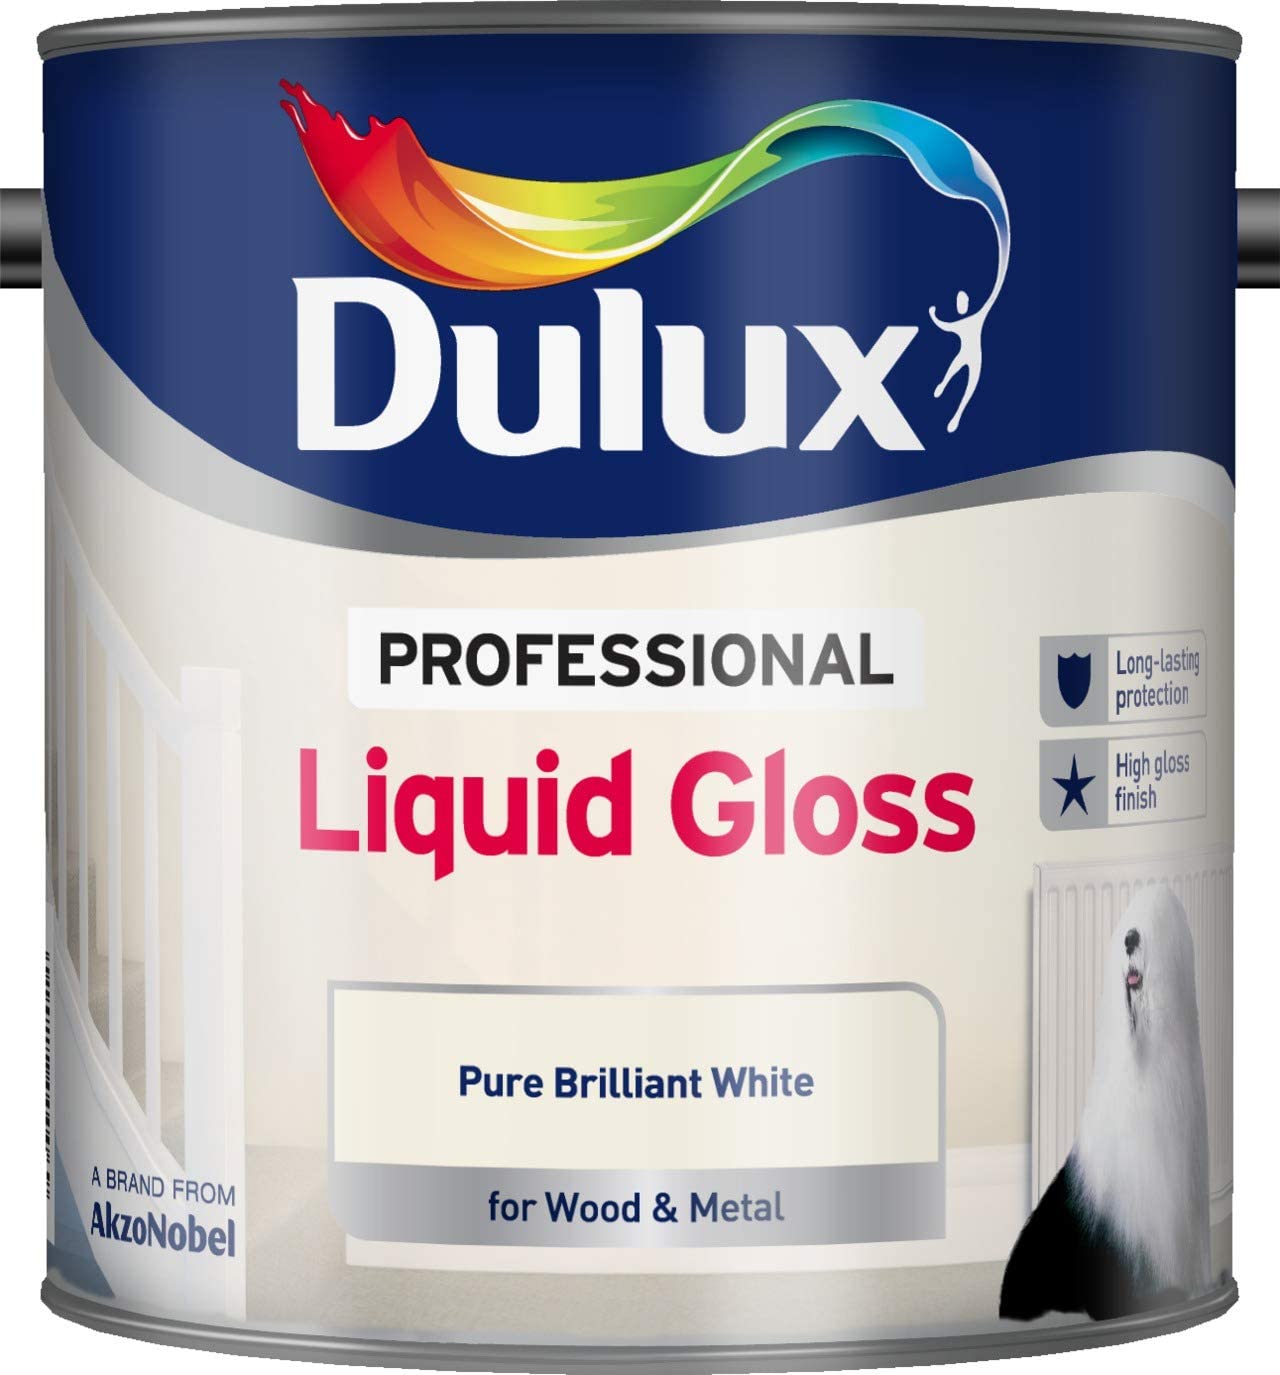 Dulux-Professional-Liquid-Gloss-Paint-For-Wood-And-Metal-Pure-Brilliant-White-2.5L